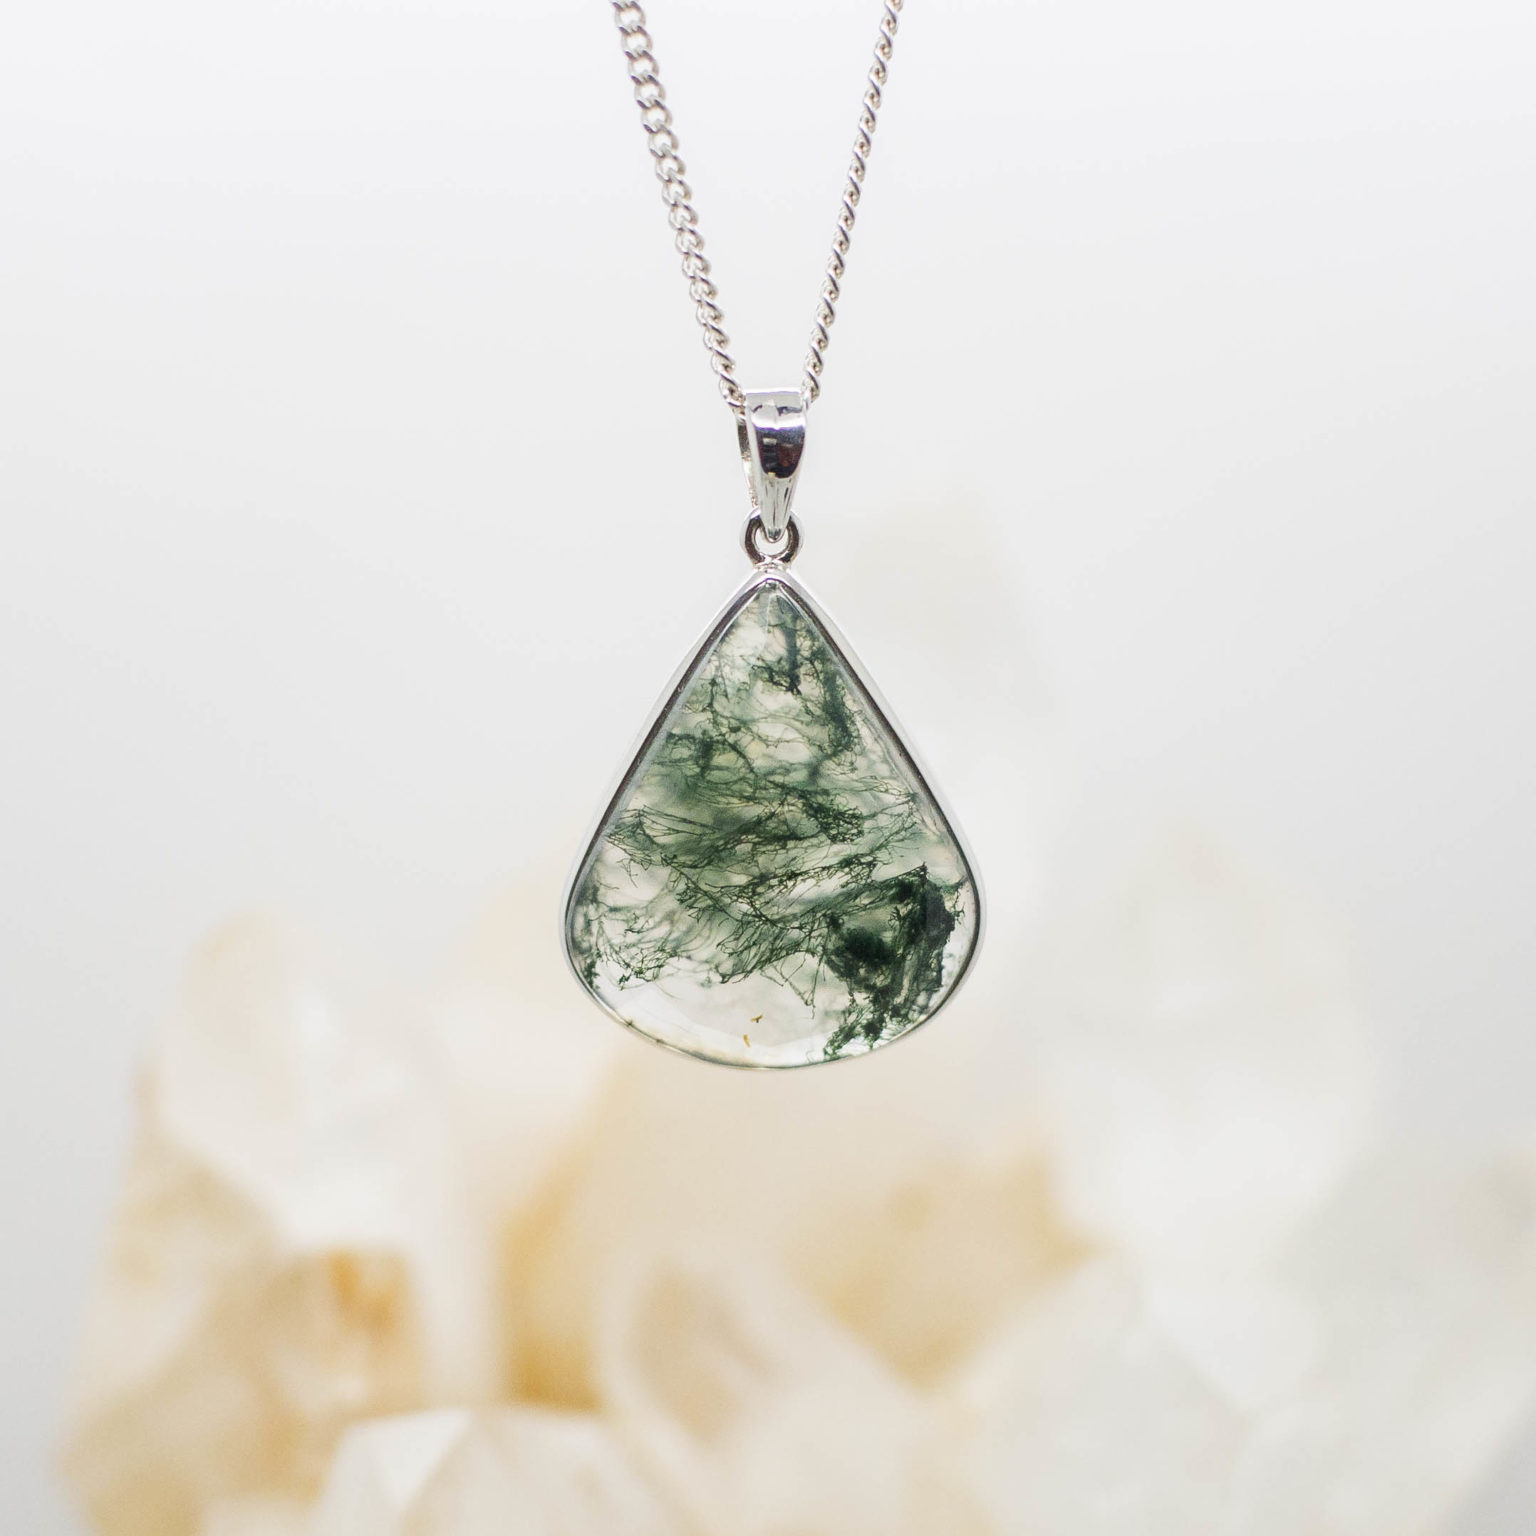 Buy Moss Agate Pendant 3919 - Colliers Crystals